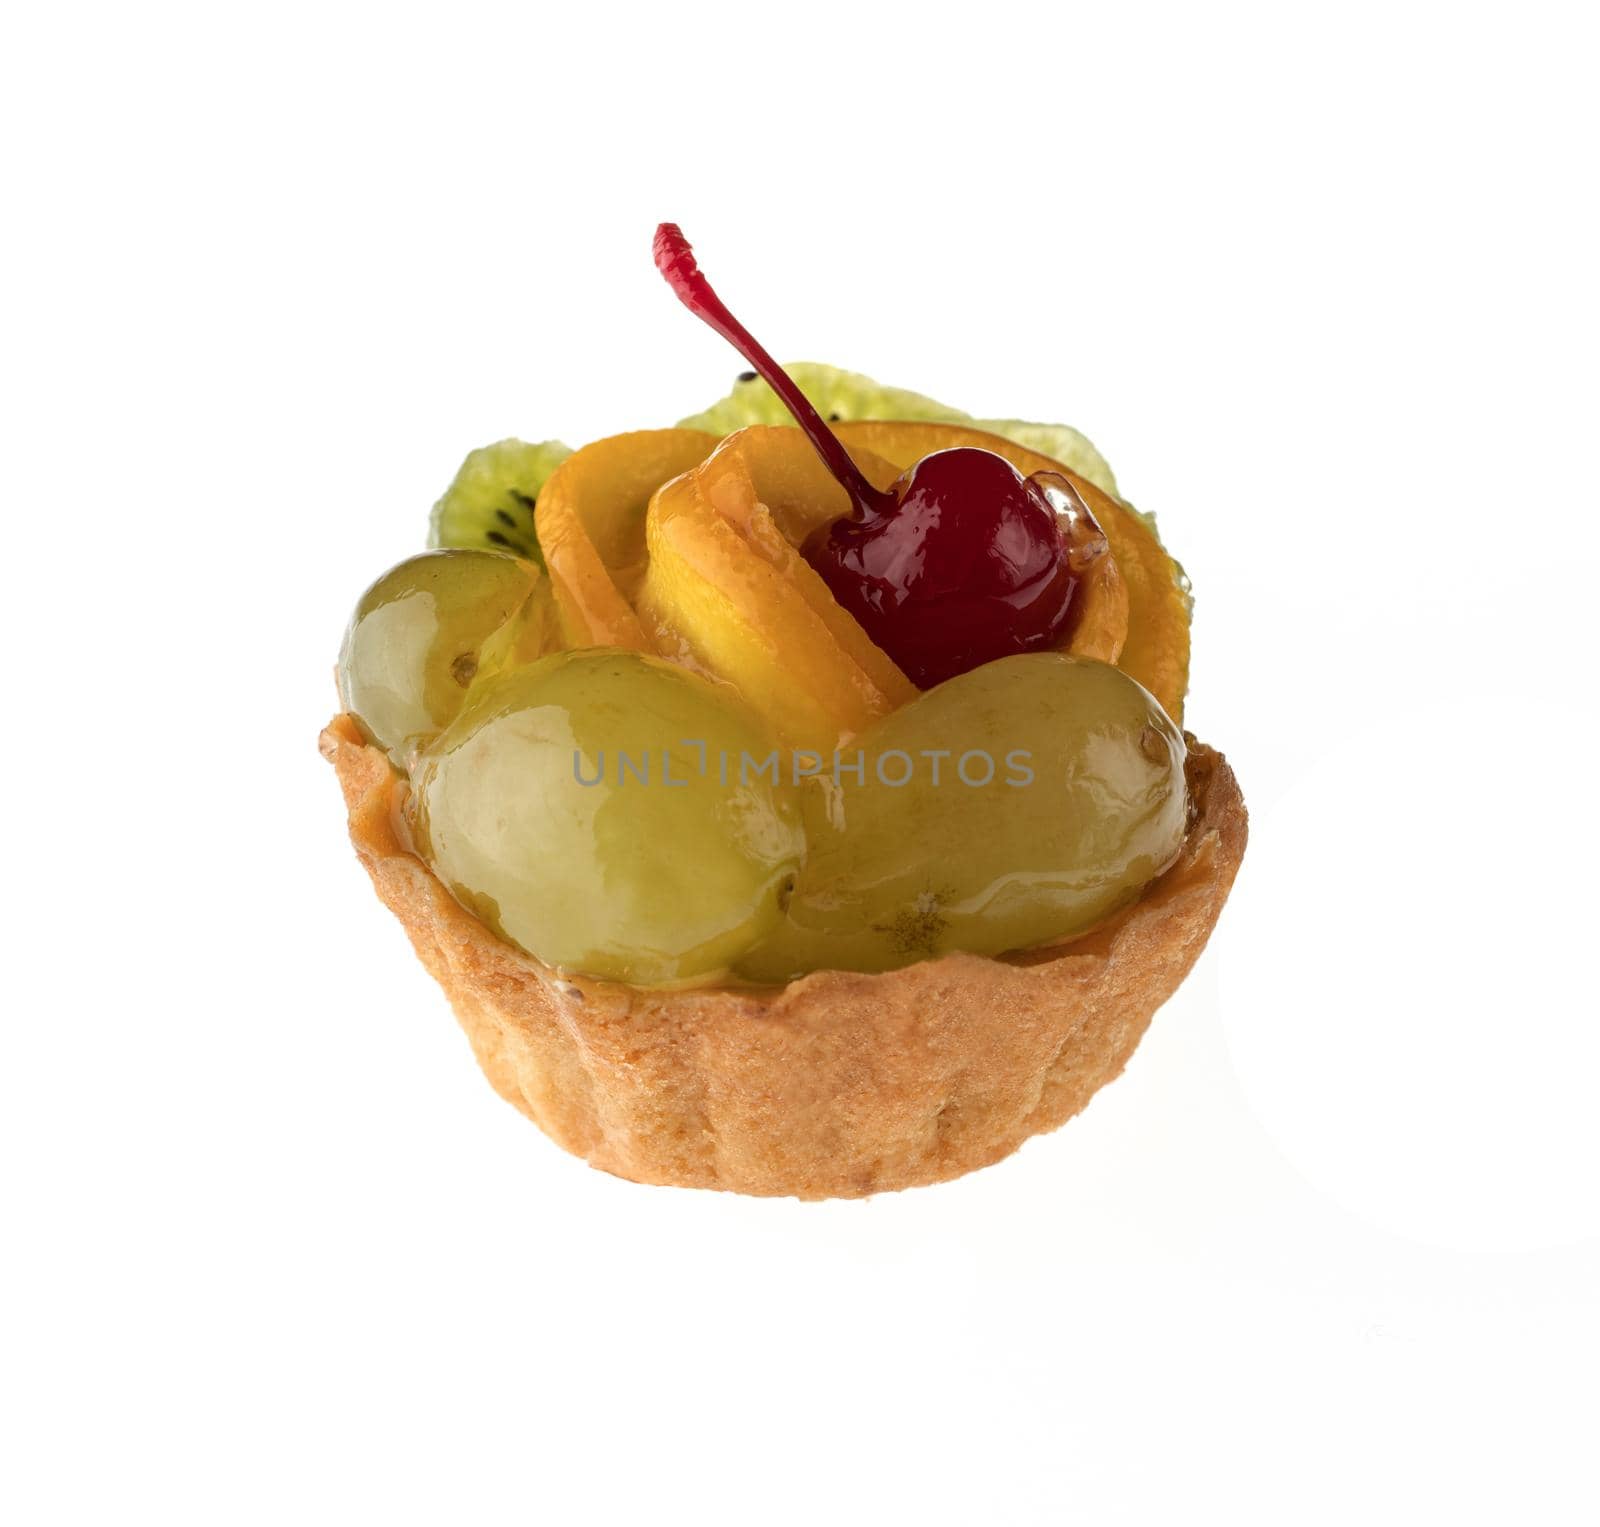 Dessert, fruit cake, with cherry grapes and orange slices, on a white background in isolation